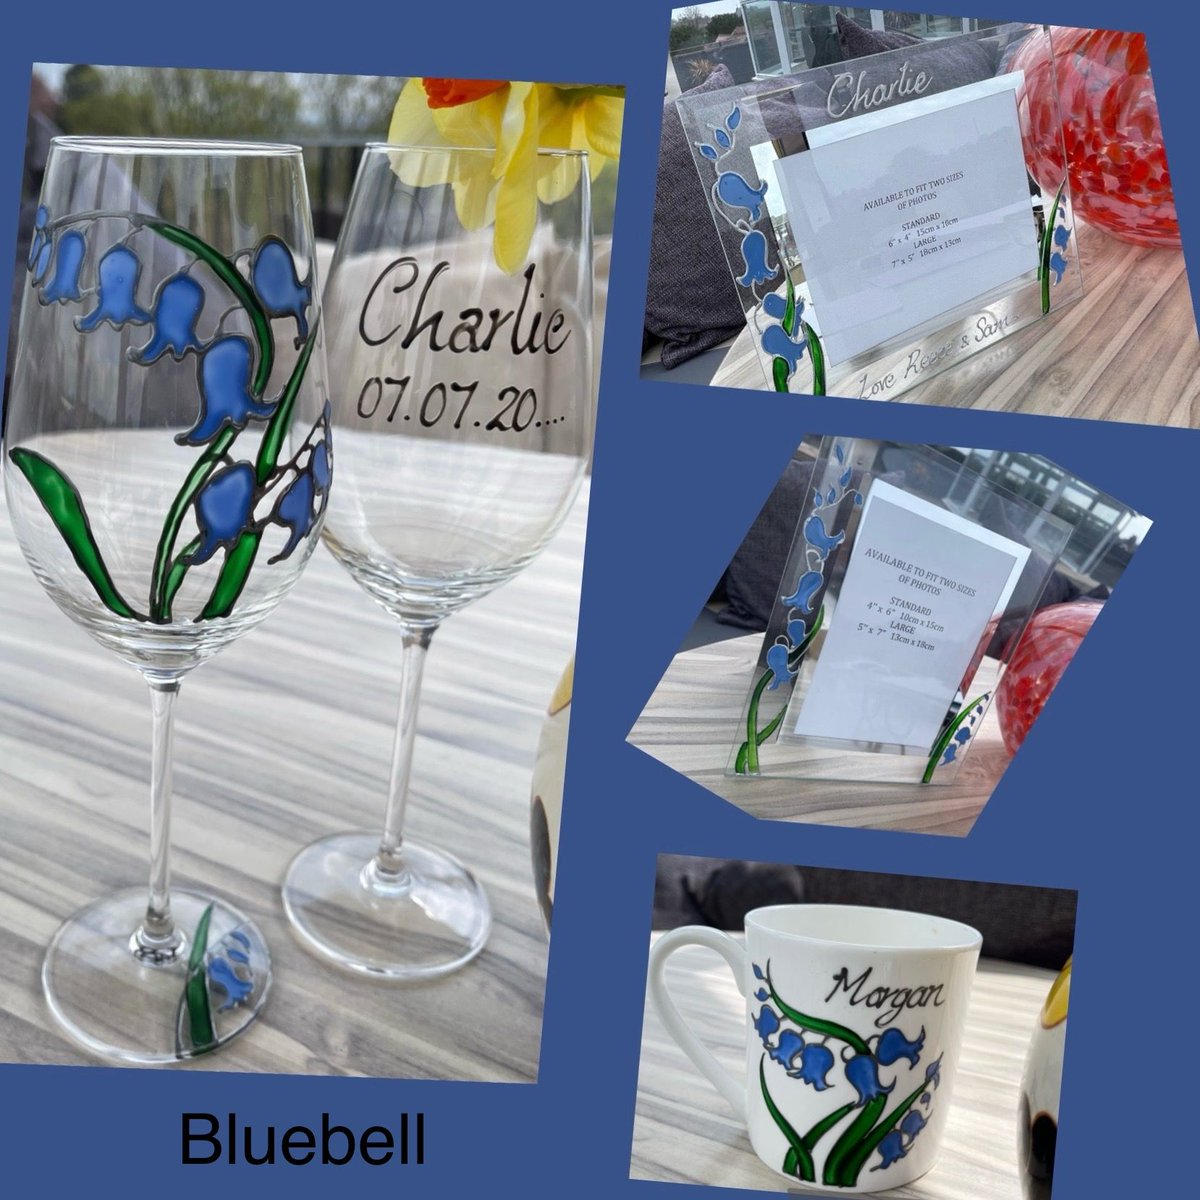 Hand Painted Bluebell Gift ideas
@dreamairshop 
#lovebluebells #perfectgift  #giftsforeveryone #haveagreatthursday